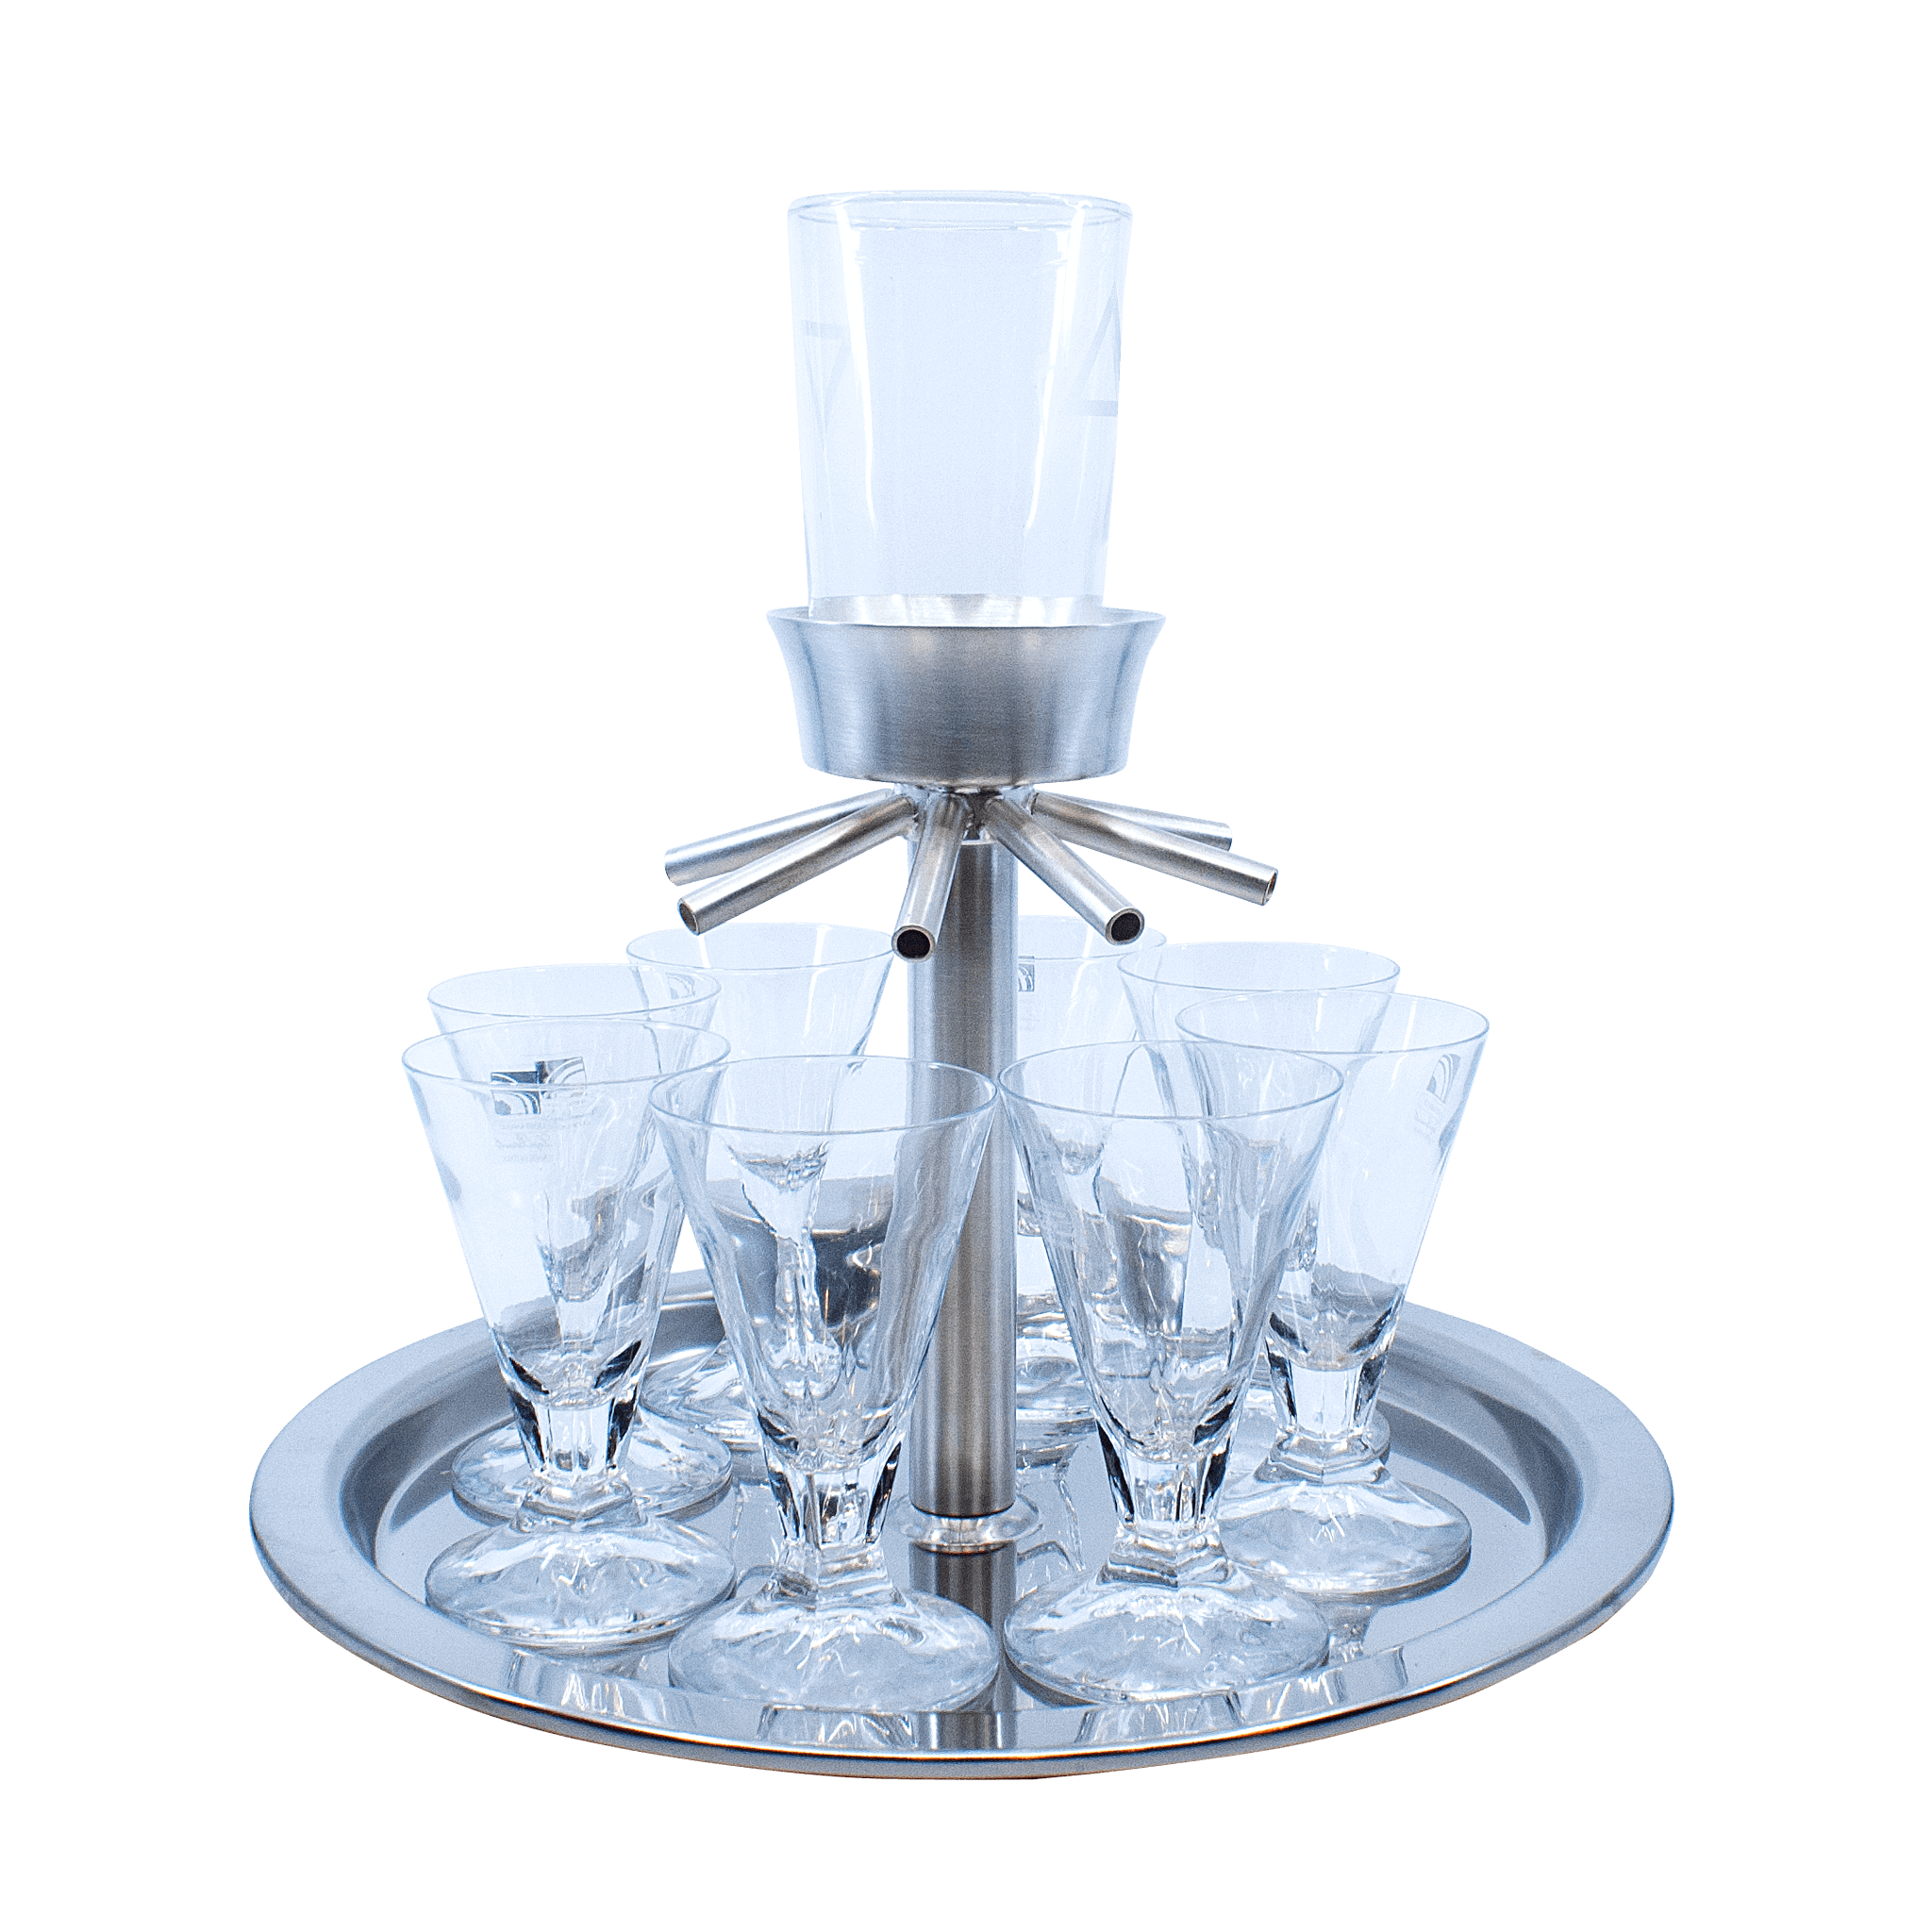 Shabbat Kiddush wine fountain silver-plated with crystal glasses, - Piece By Zion Hadad